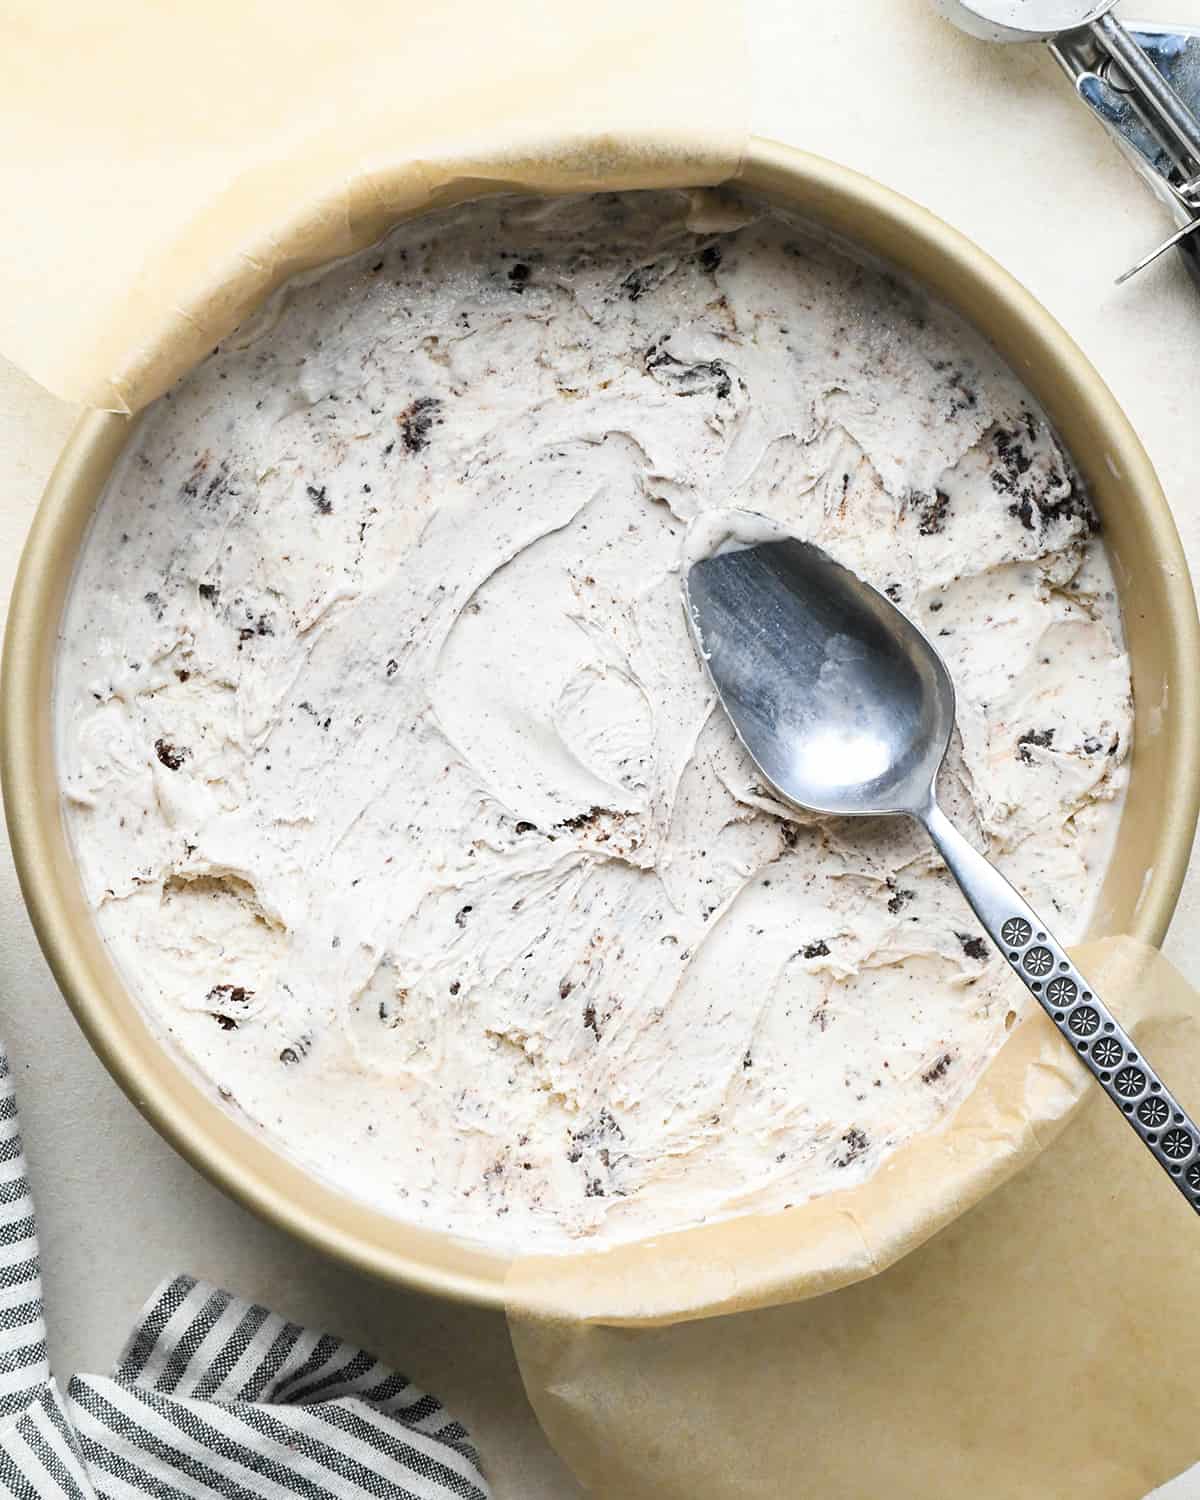 assembling an ice cream cake - ice cream in a cake pan after spreading out